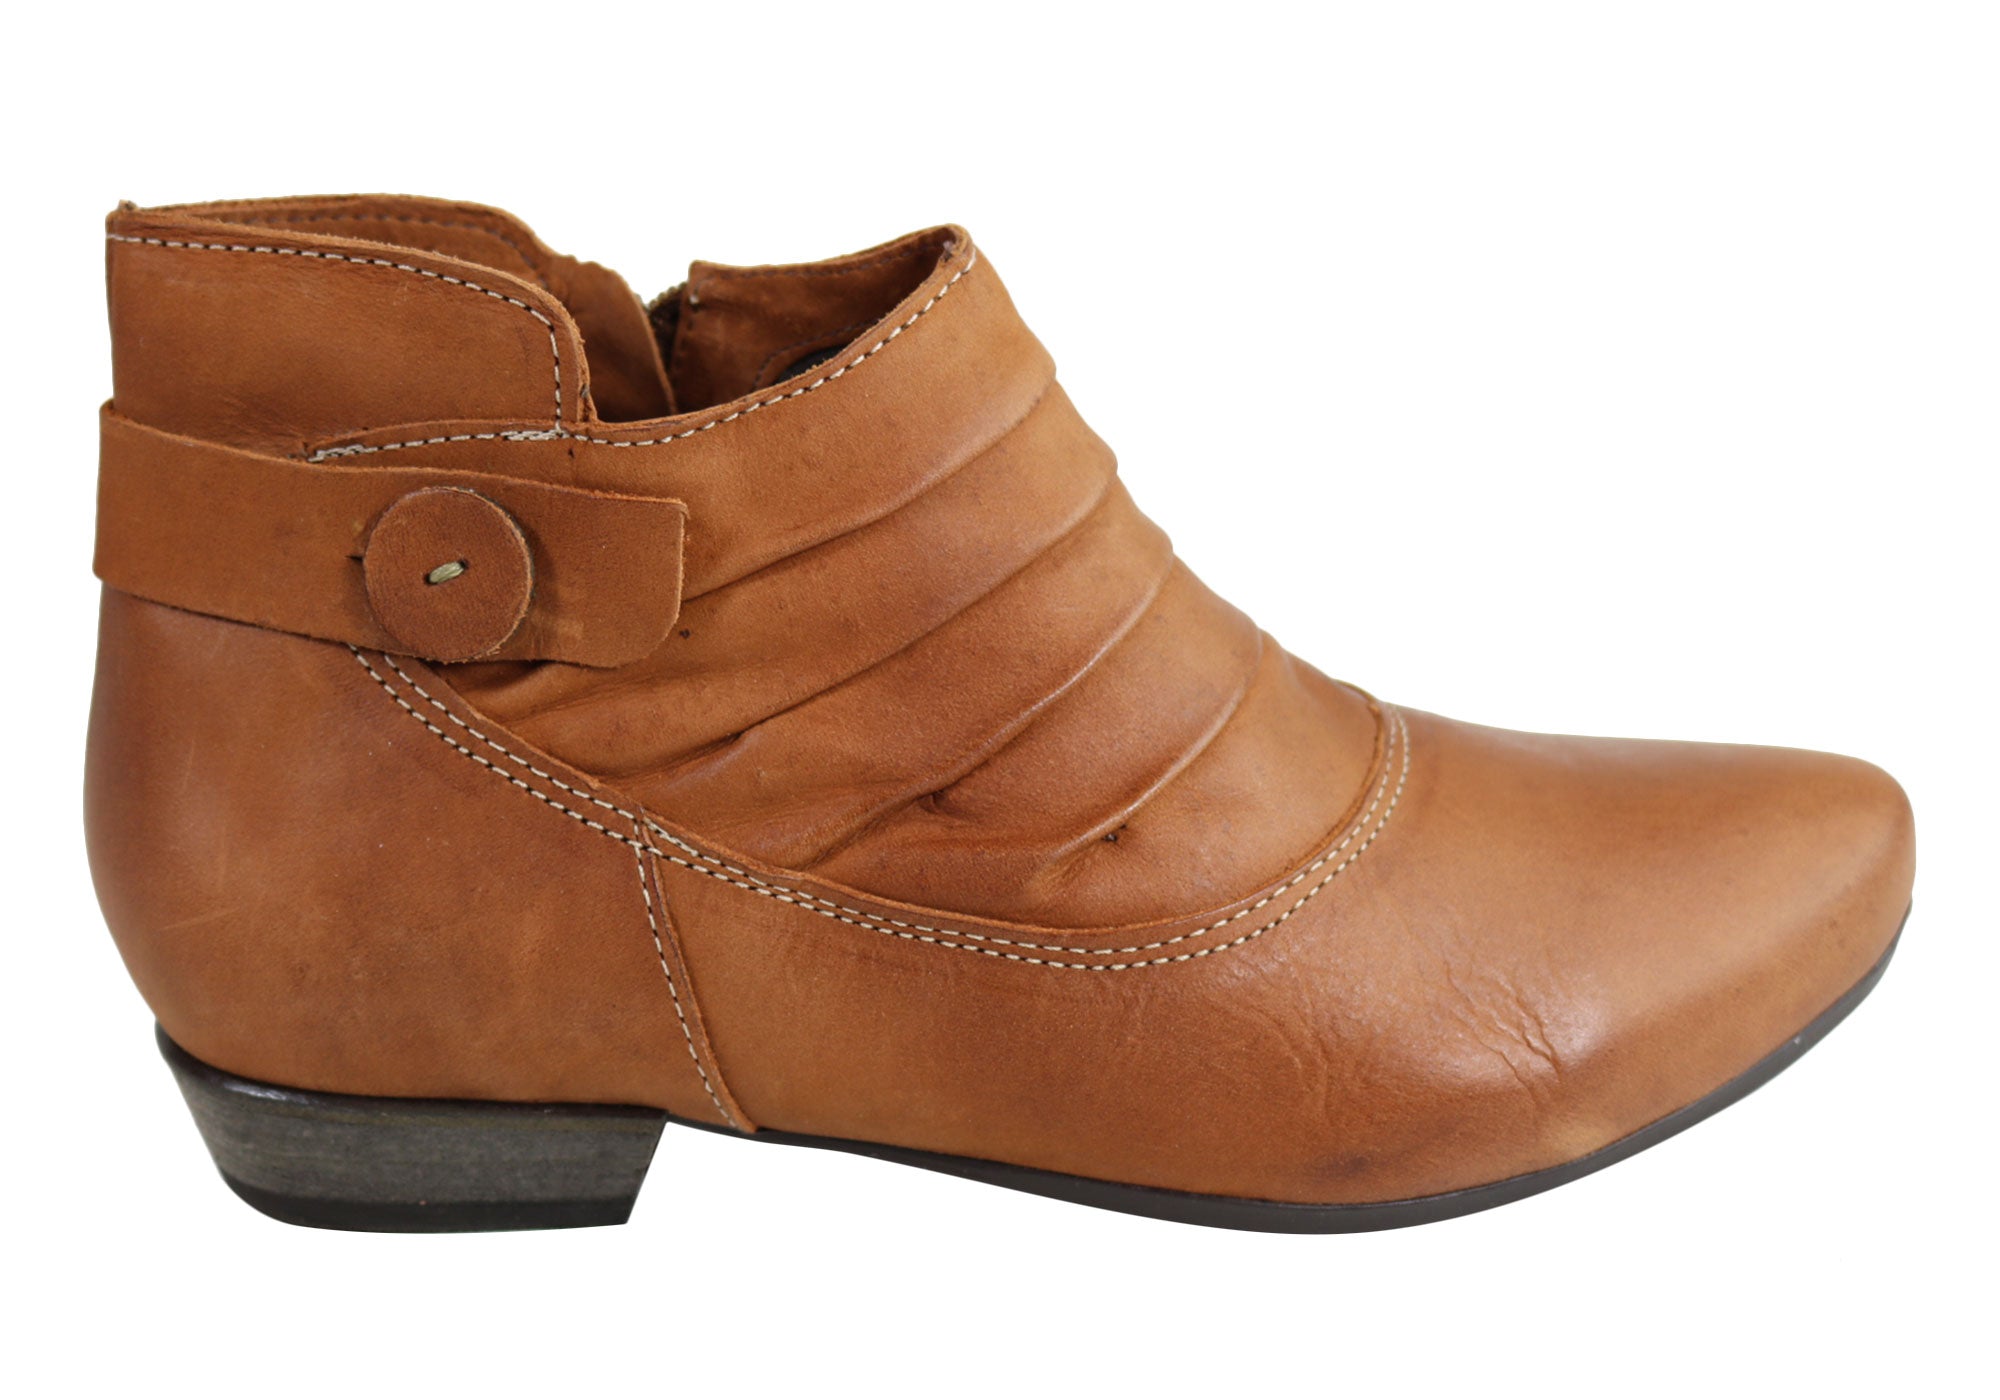 comfortable ankle boots